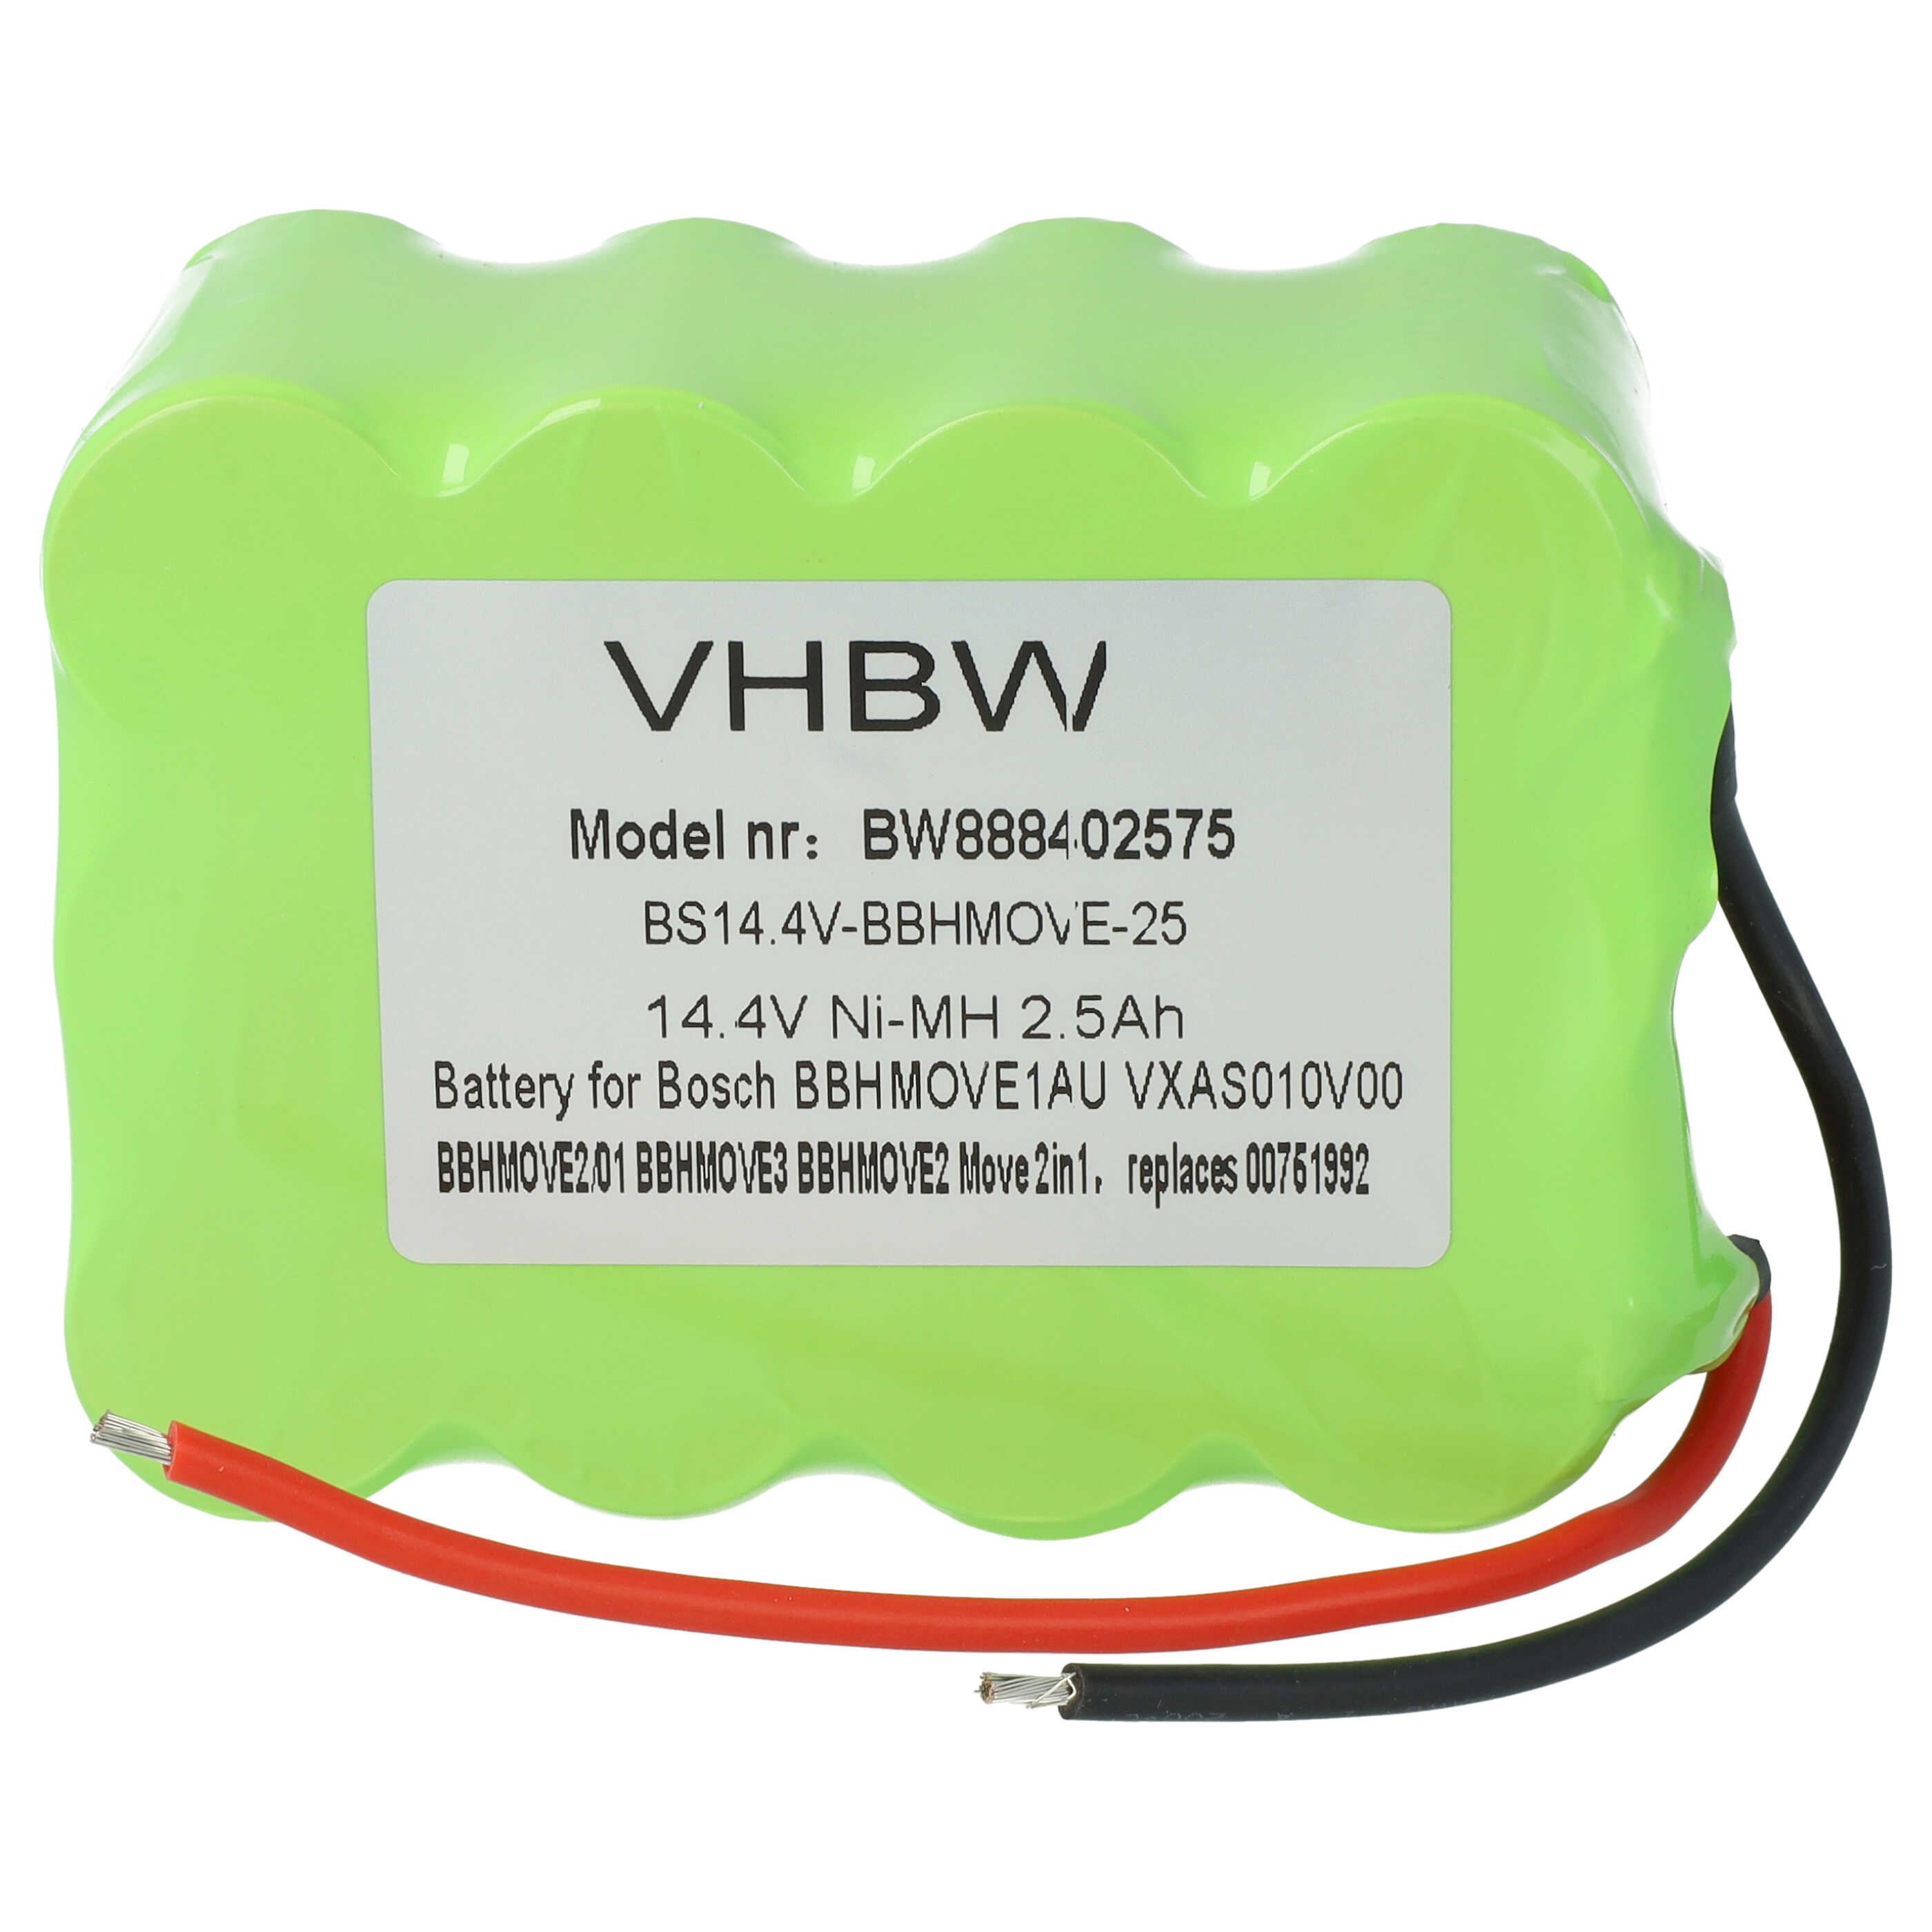 Battery Replacement for Bosch GPRHC18SV007, FD8901, GP180SCHSV12Y2H, 00751992 for - 2500mAh, 14.4V, NiMH